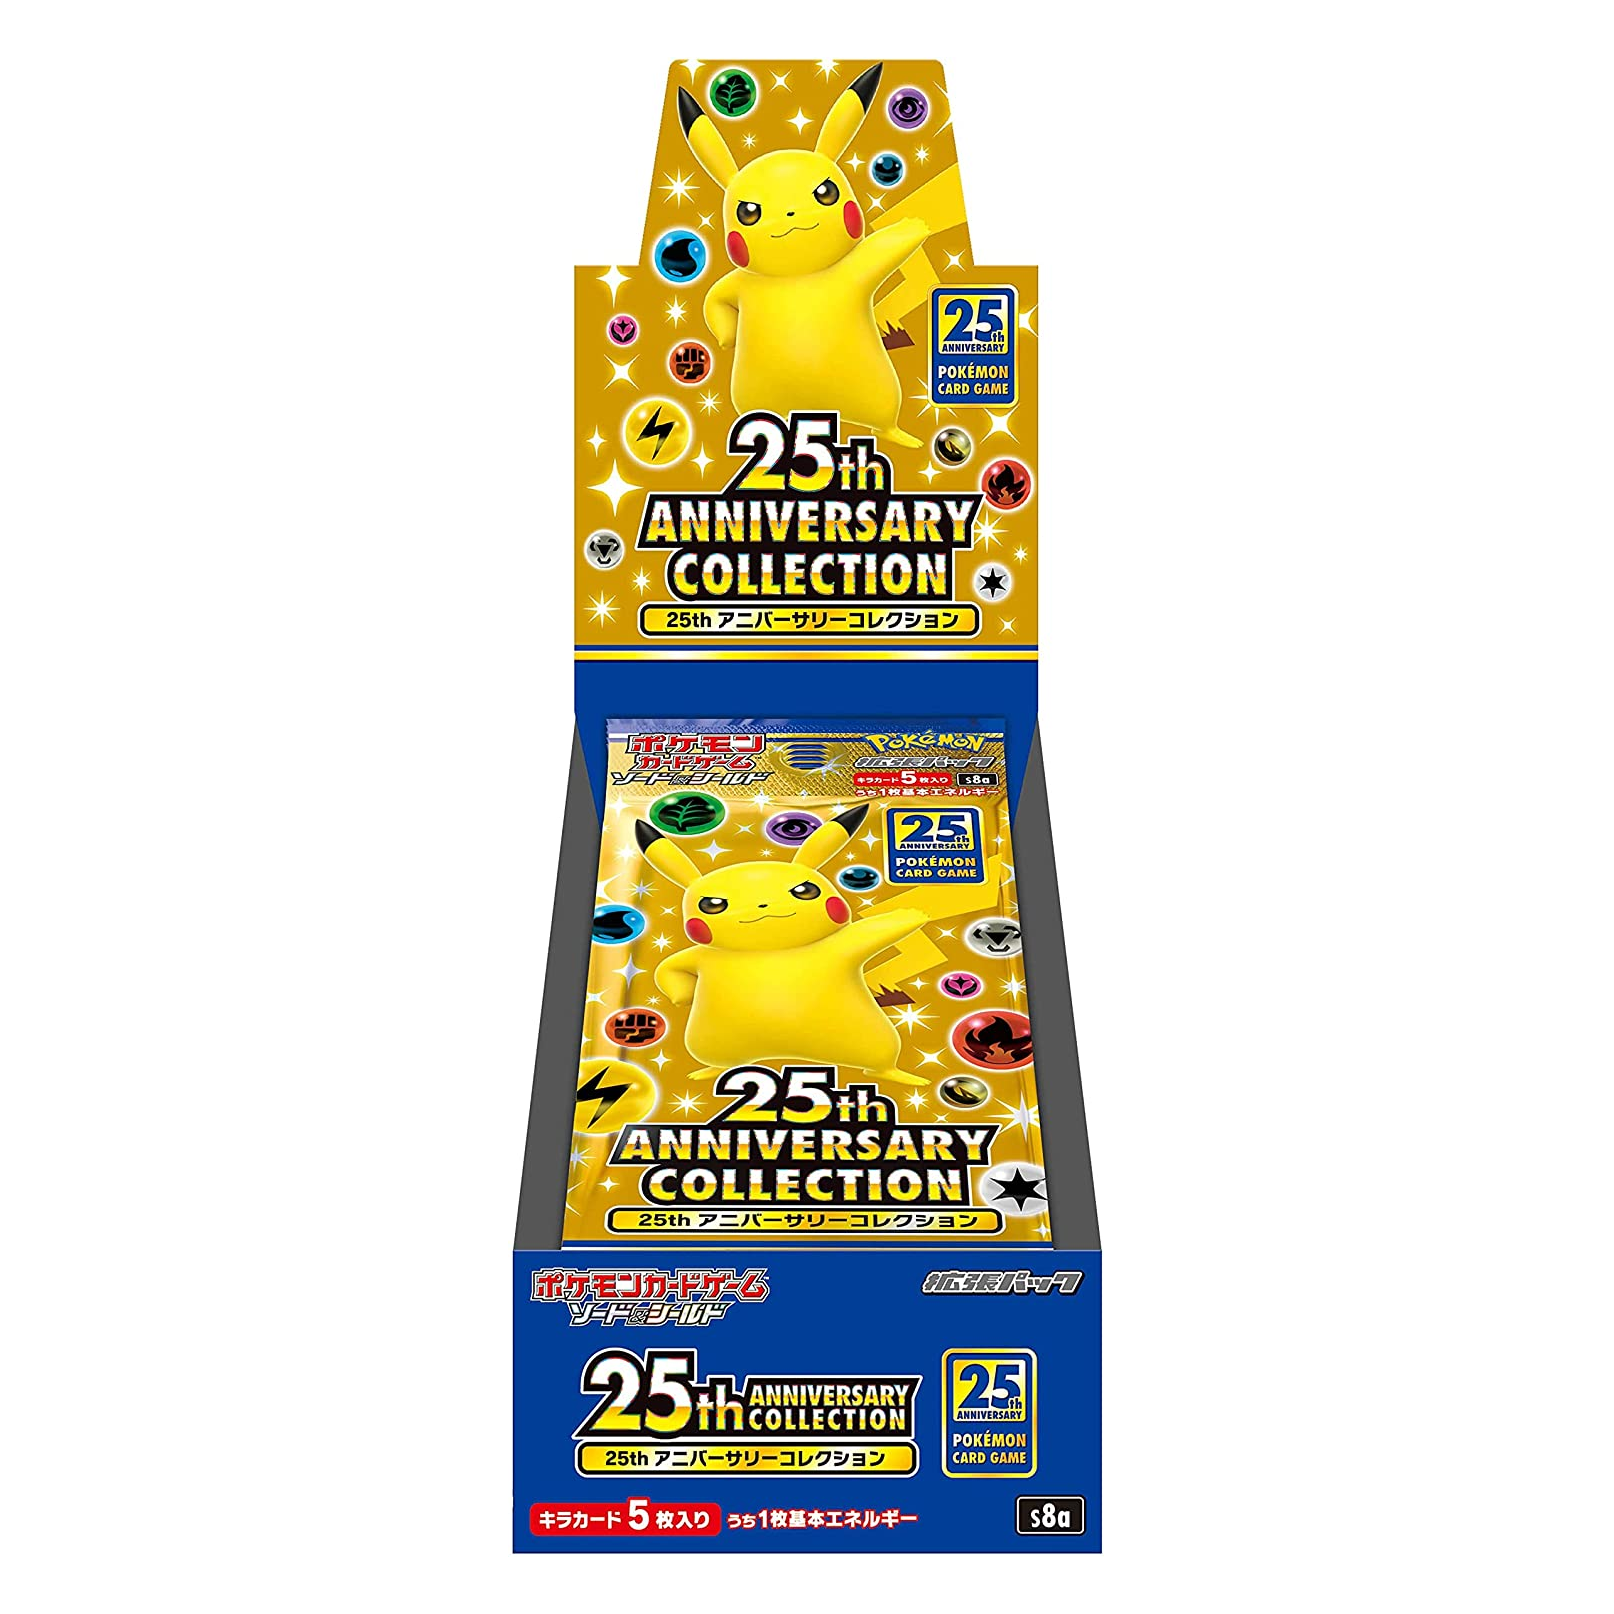 Pokémon Card Game - Sun & Moon Expansion Pack "25th Anniversary Collection" [S8a] (japanese display) (pre-order)--0